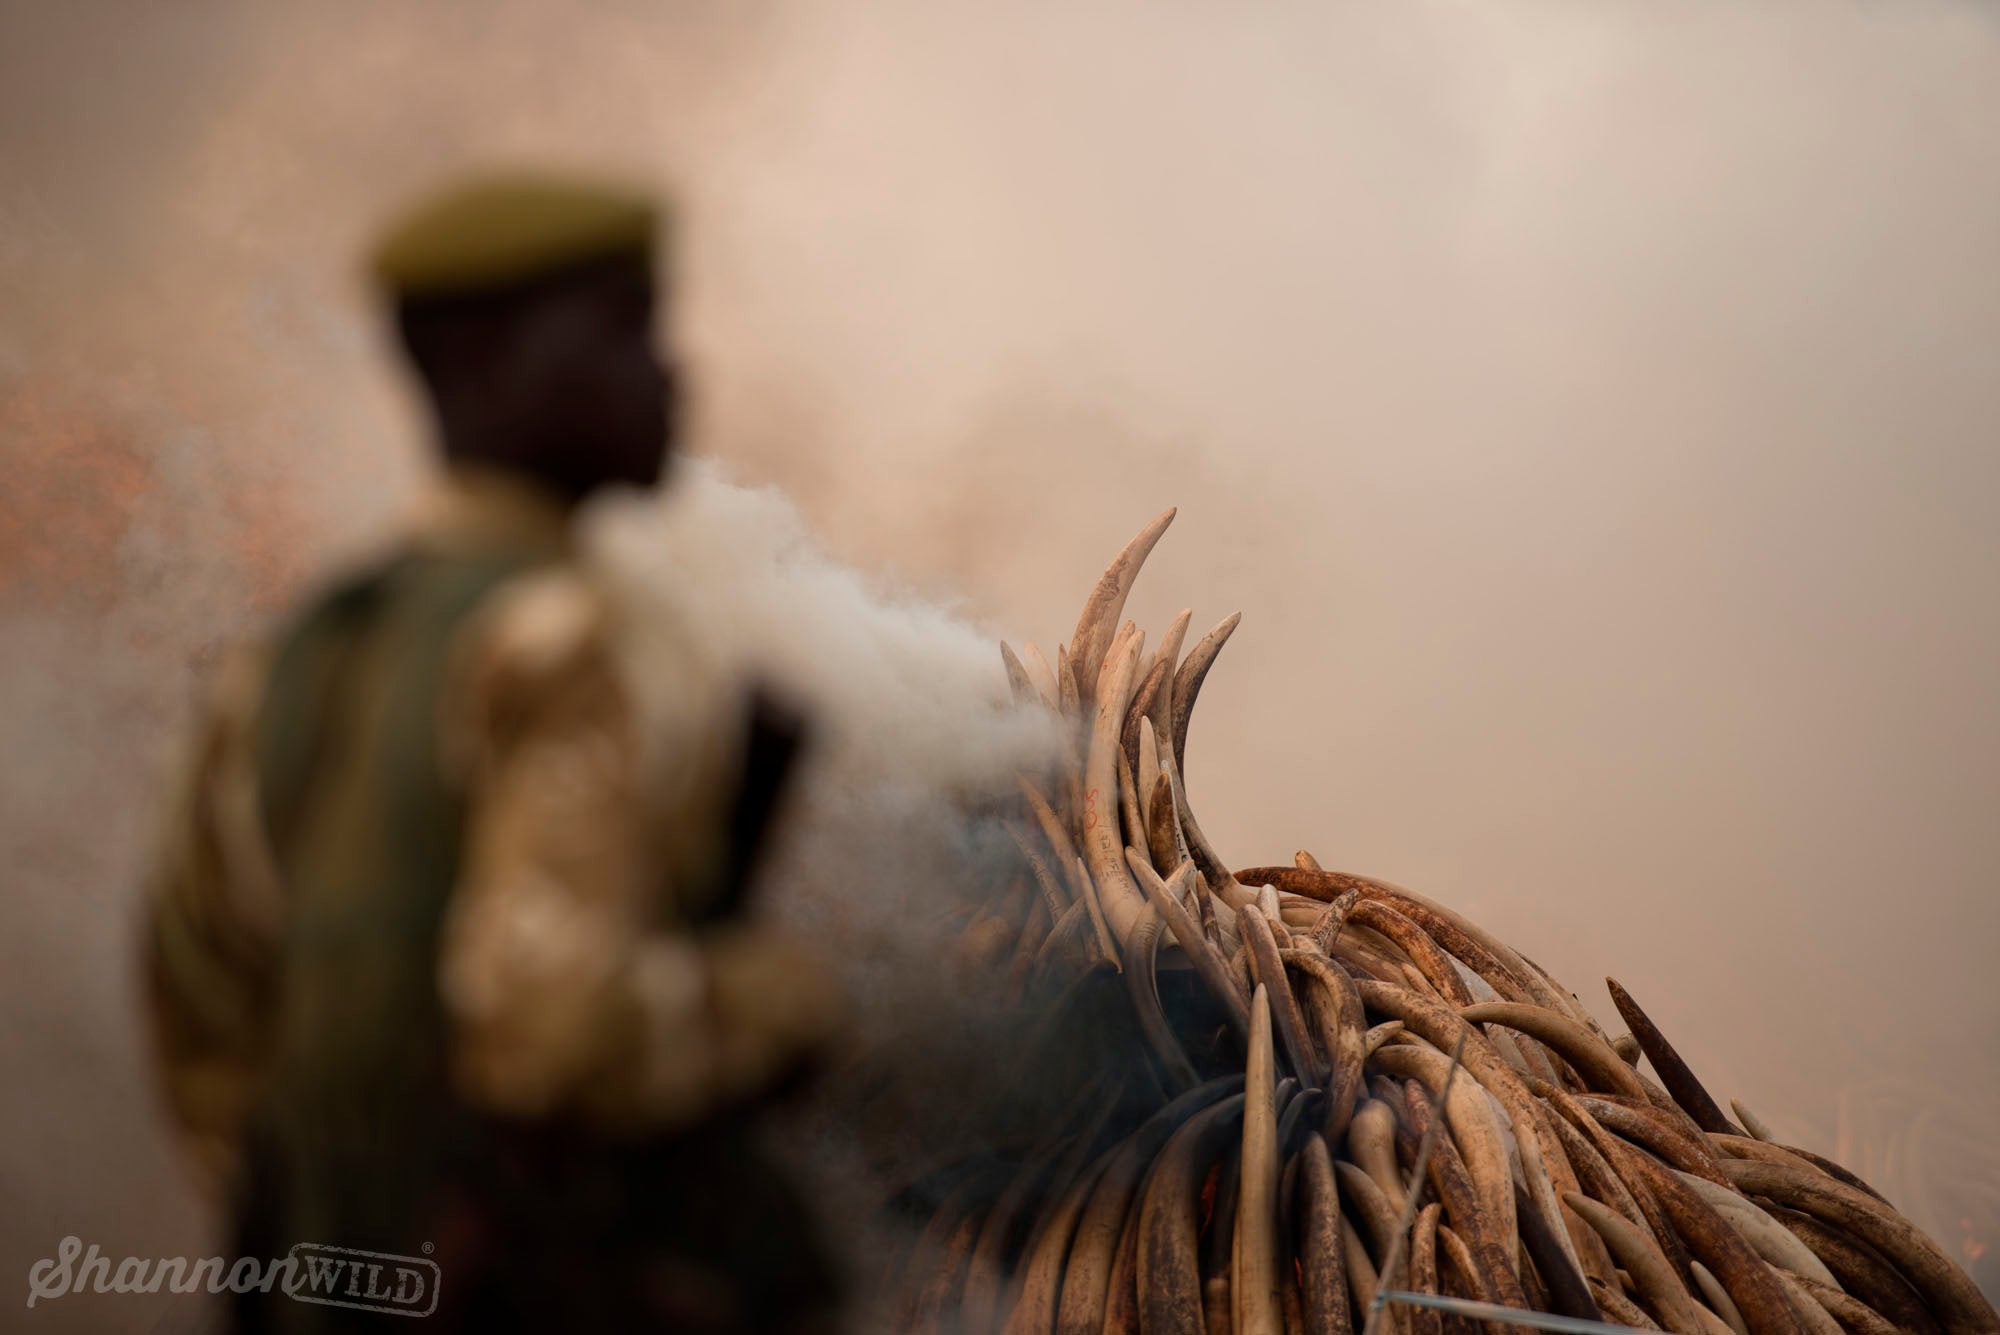 Confiscated ivory being burned in Kenya. Photo by Shannon Wild